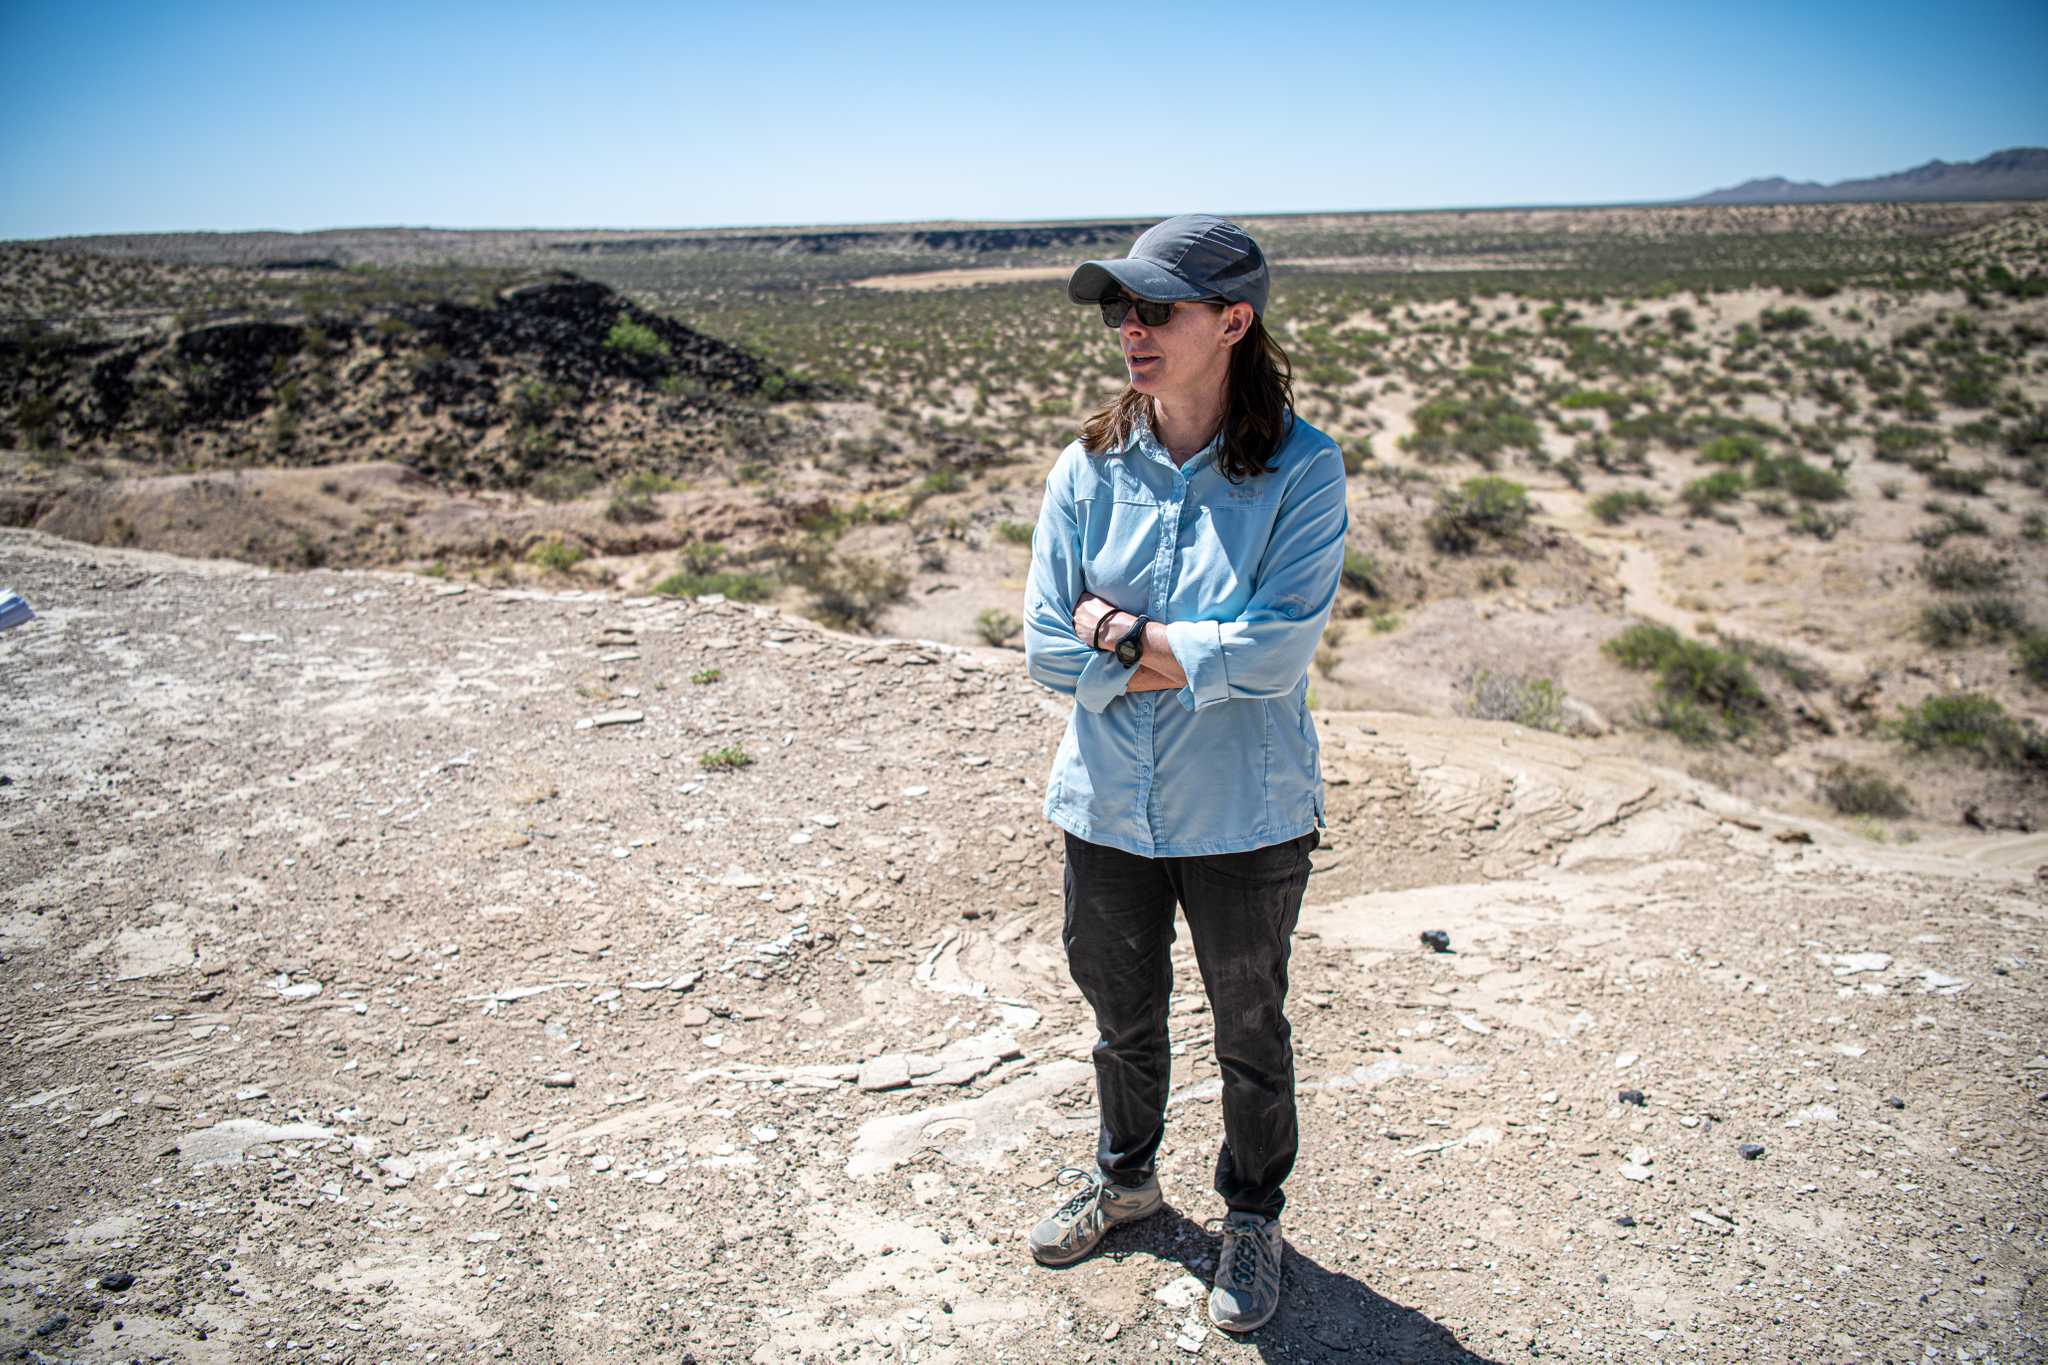 SBU Geologist Deanne Rogers at Potrillo Volcanic Field in New Mexico, April 2022